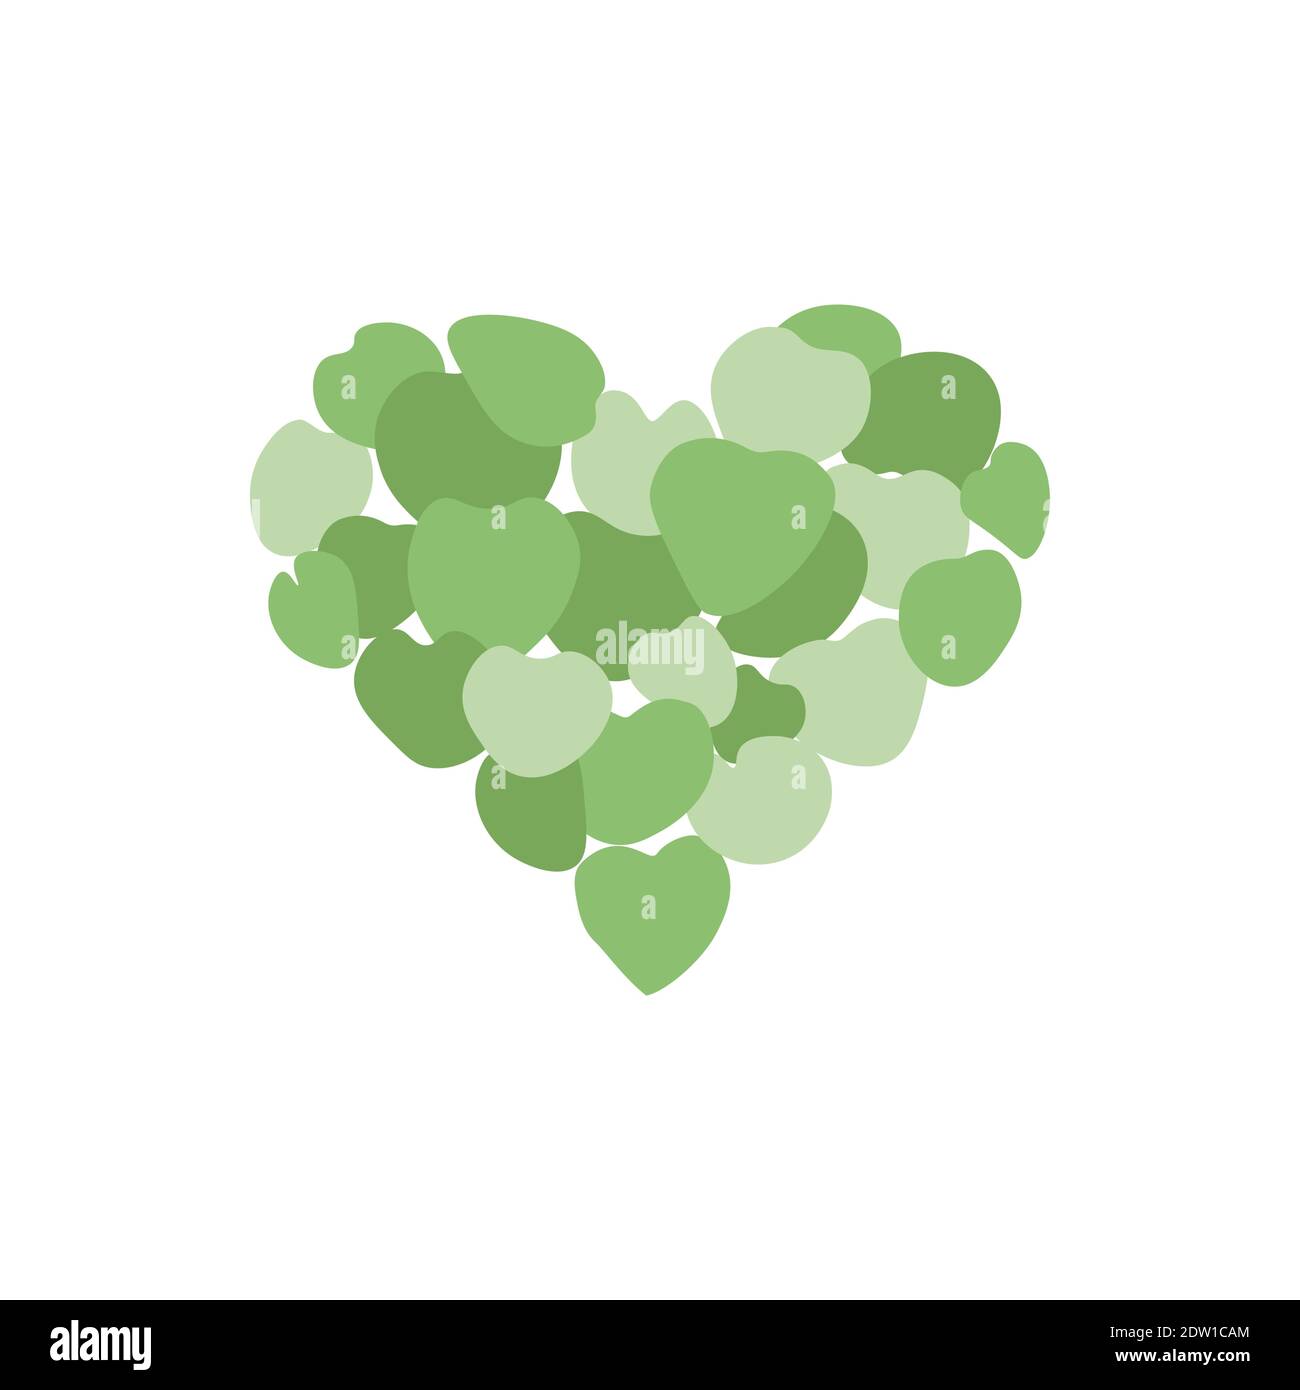 Green heart vector flat illustration isolated on white background. Big heart  sign consists of small dark green and light green hearts. Caring of  environment, ecology, world Earth day sign concept Stock Vector